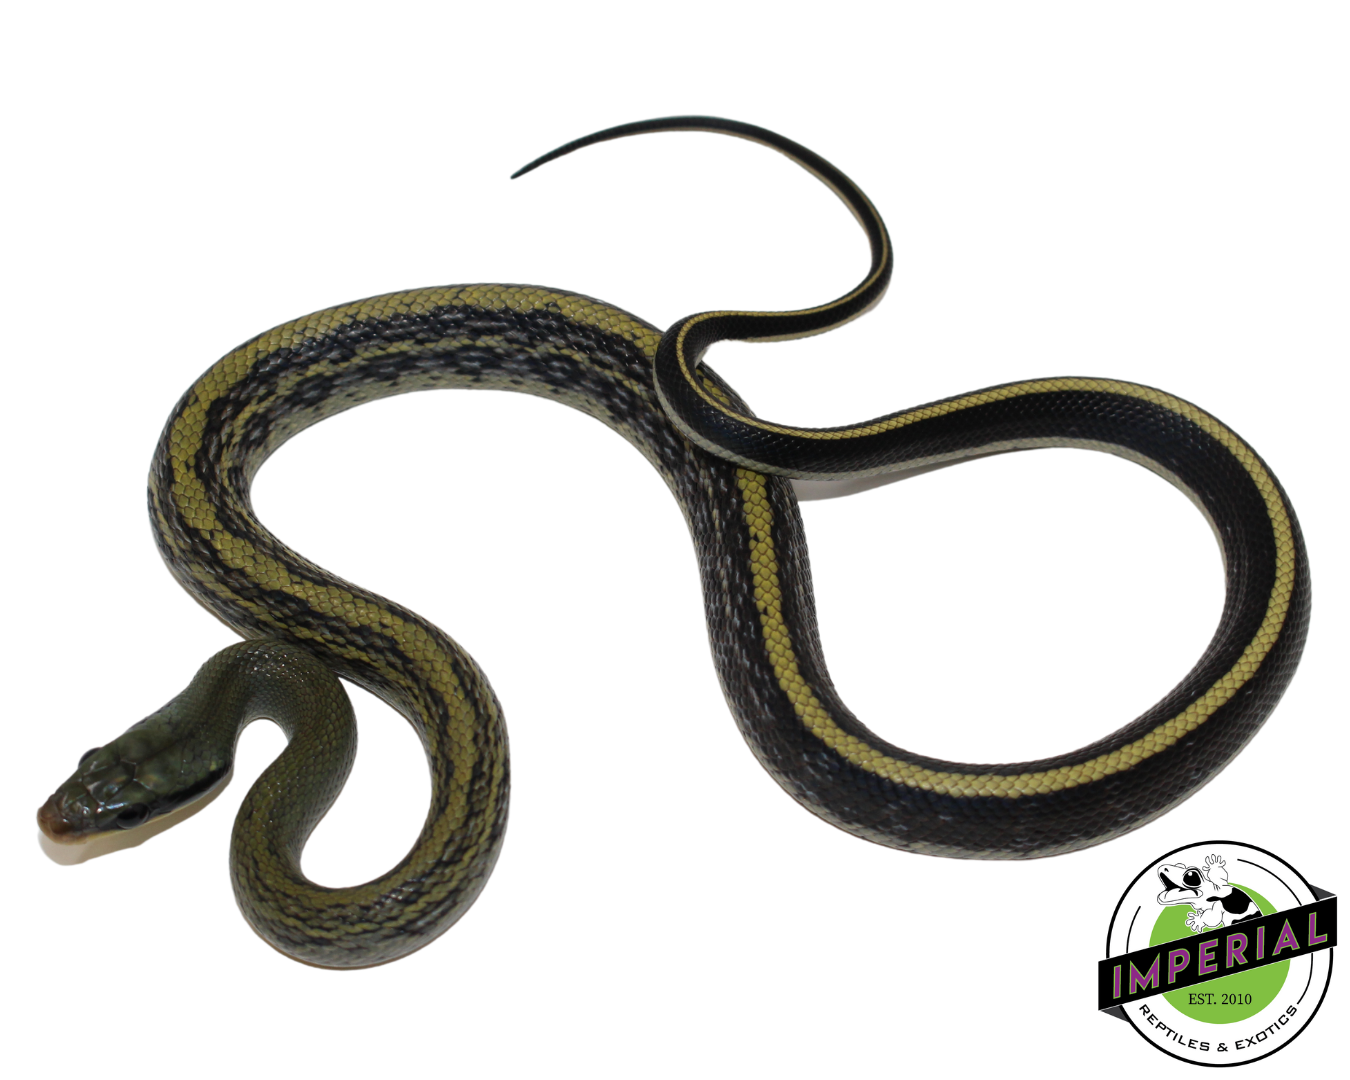 cave dwelling rat snake baby for sale, buy reptiles online